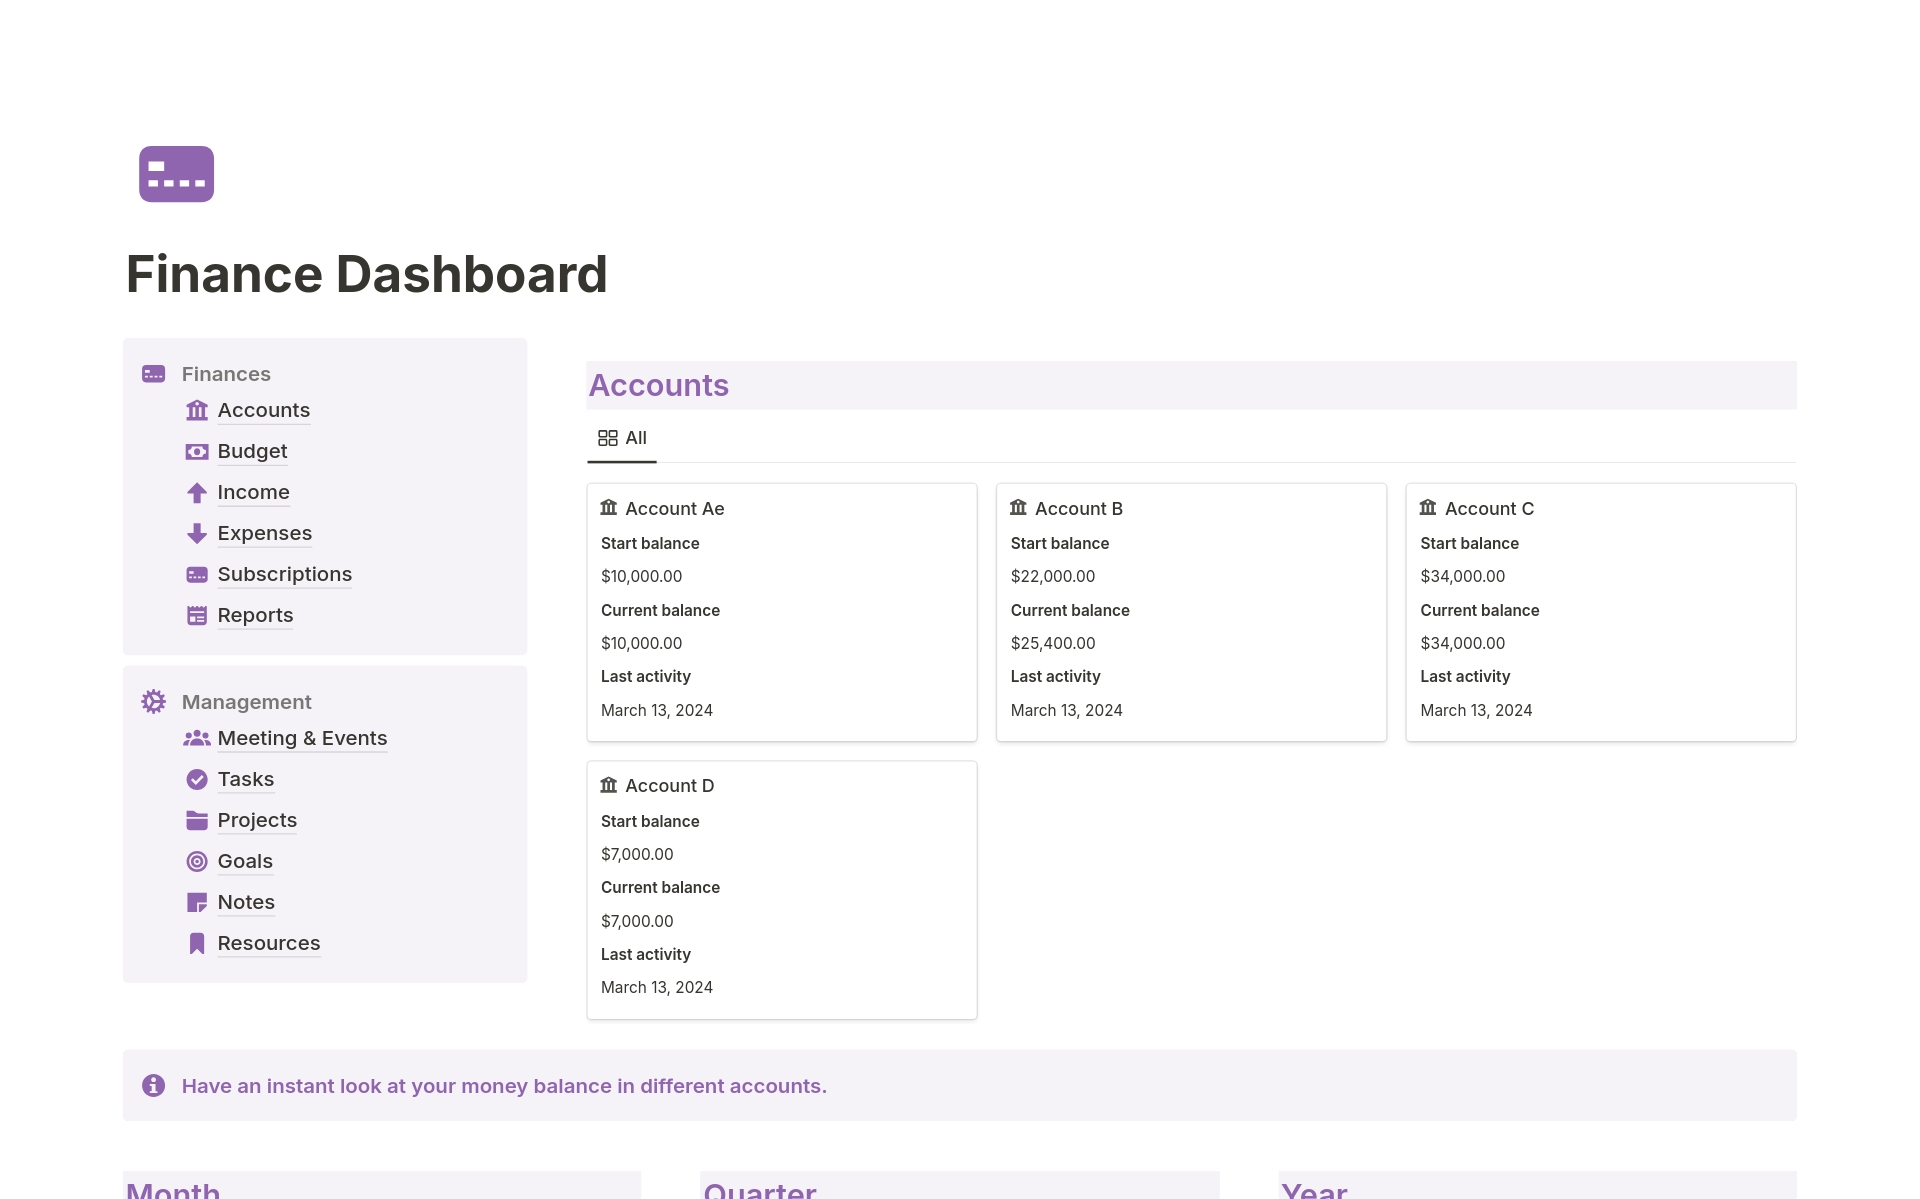 The "Notion Finance Dashboard" is a powerful template for managing your finances. It offers project management, subscription tracking, account overview, income and expense tracking, and reports and invoices. With a user-friendly interface and customizable reports